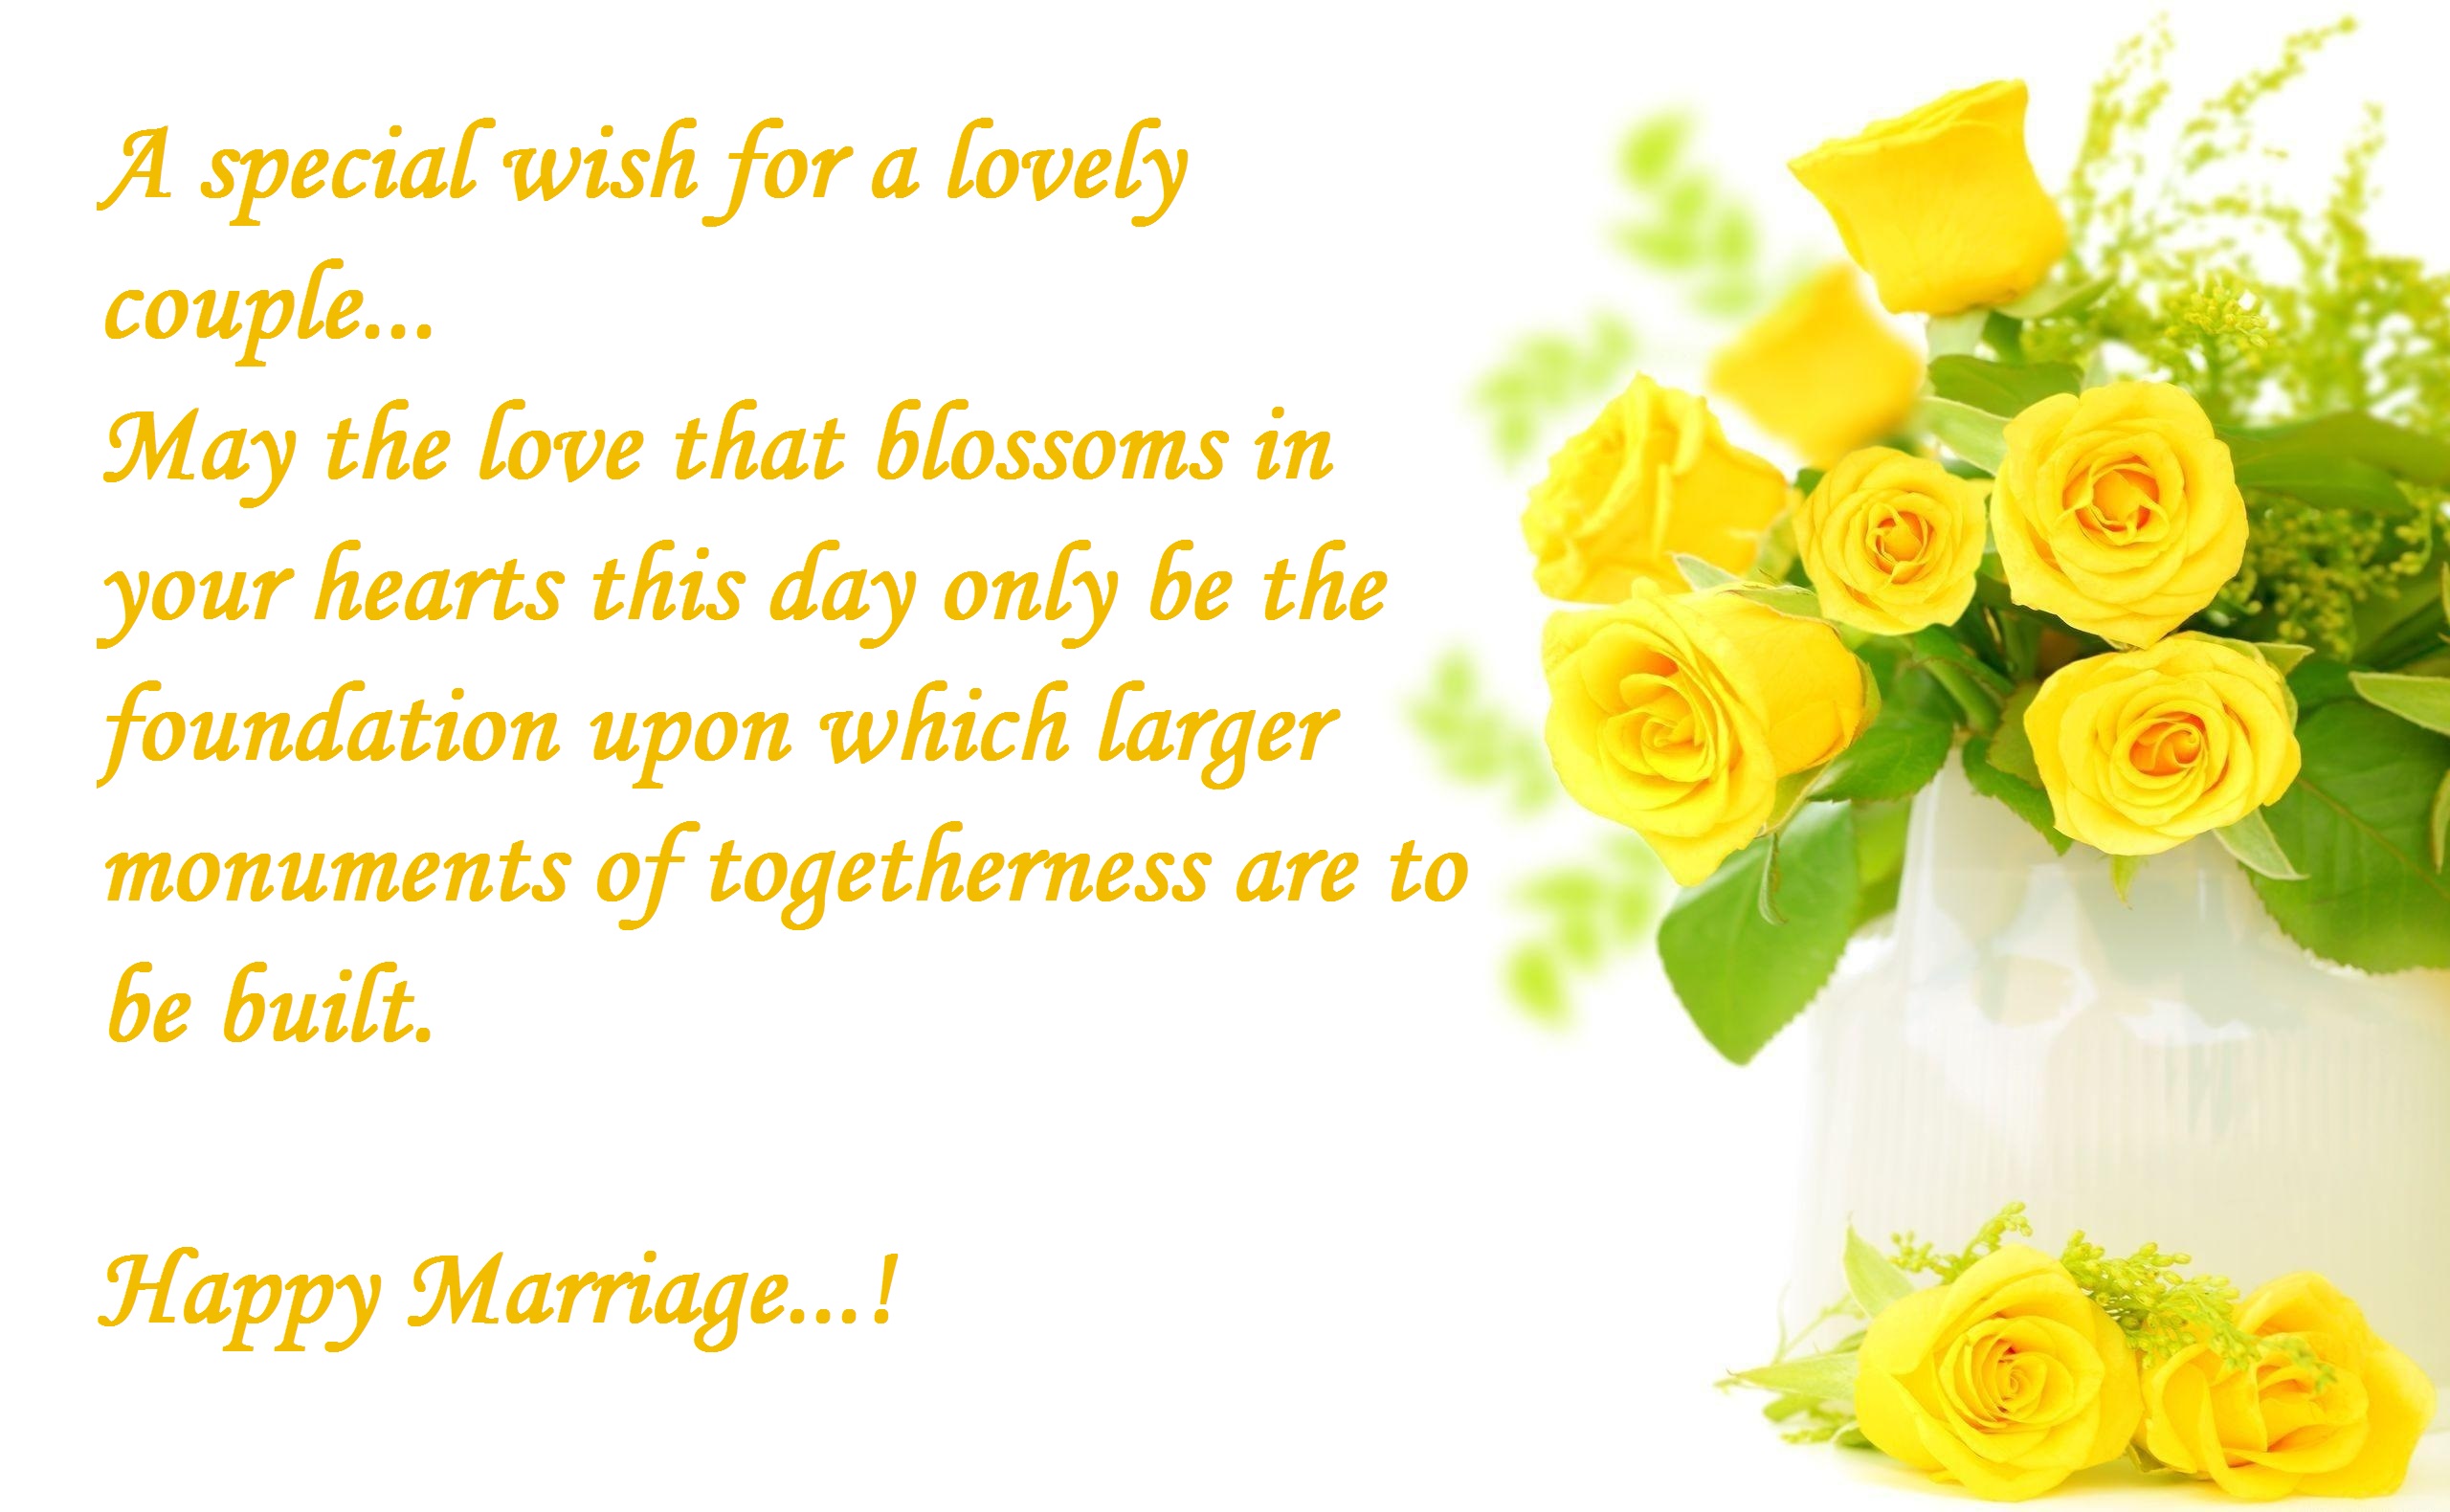 wishes for happy wedding